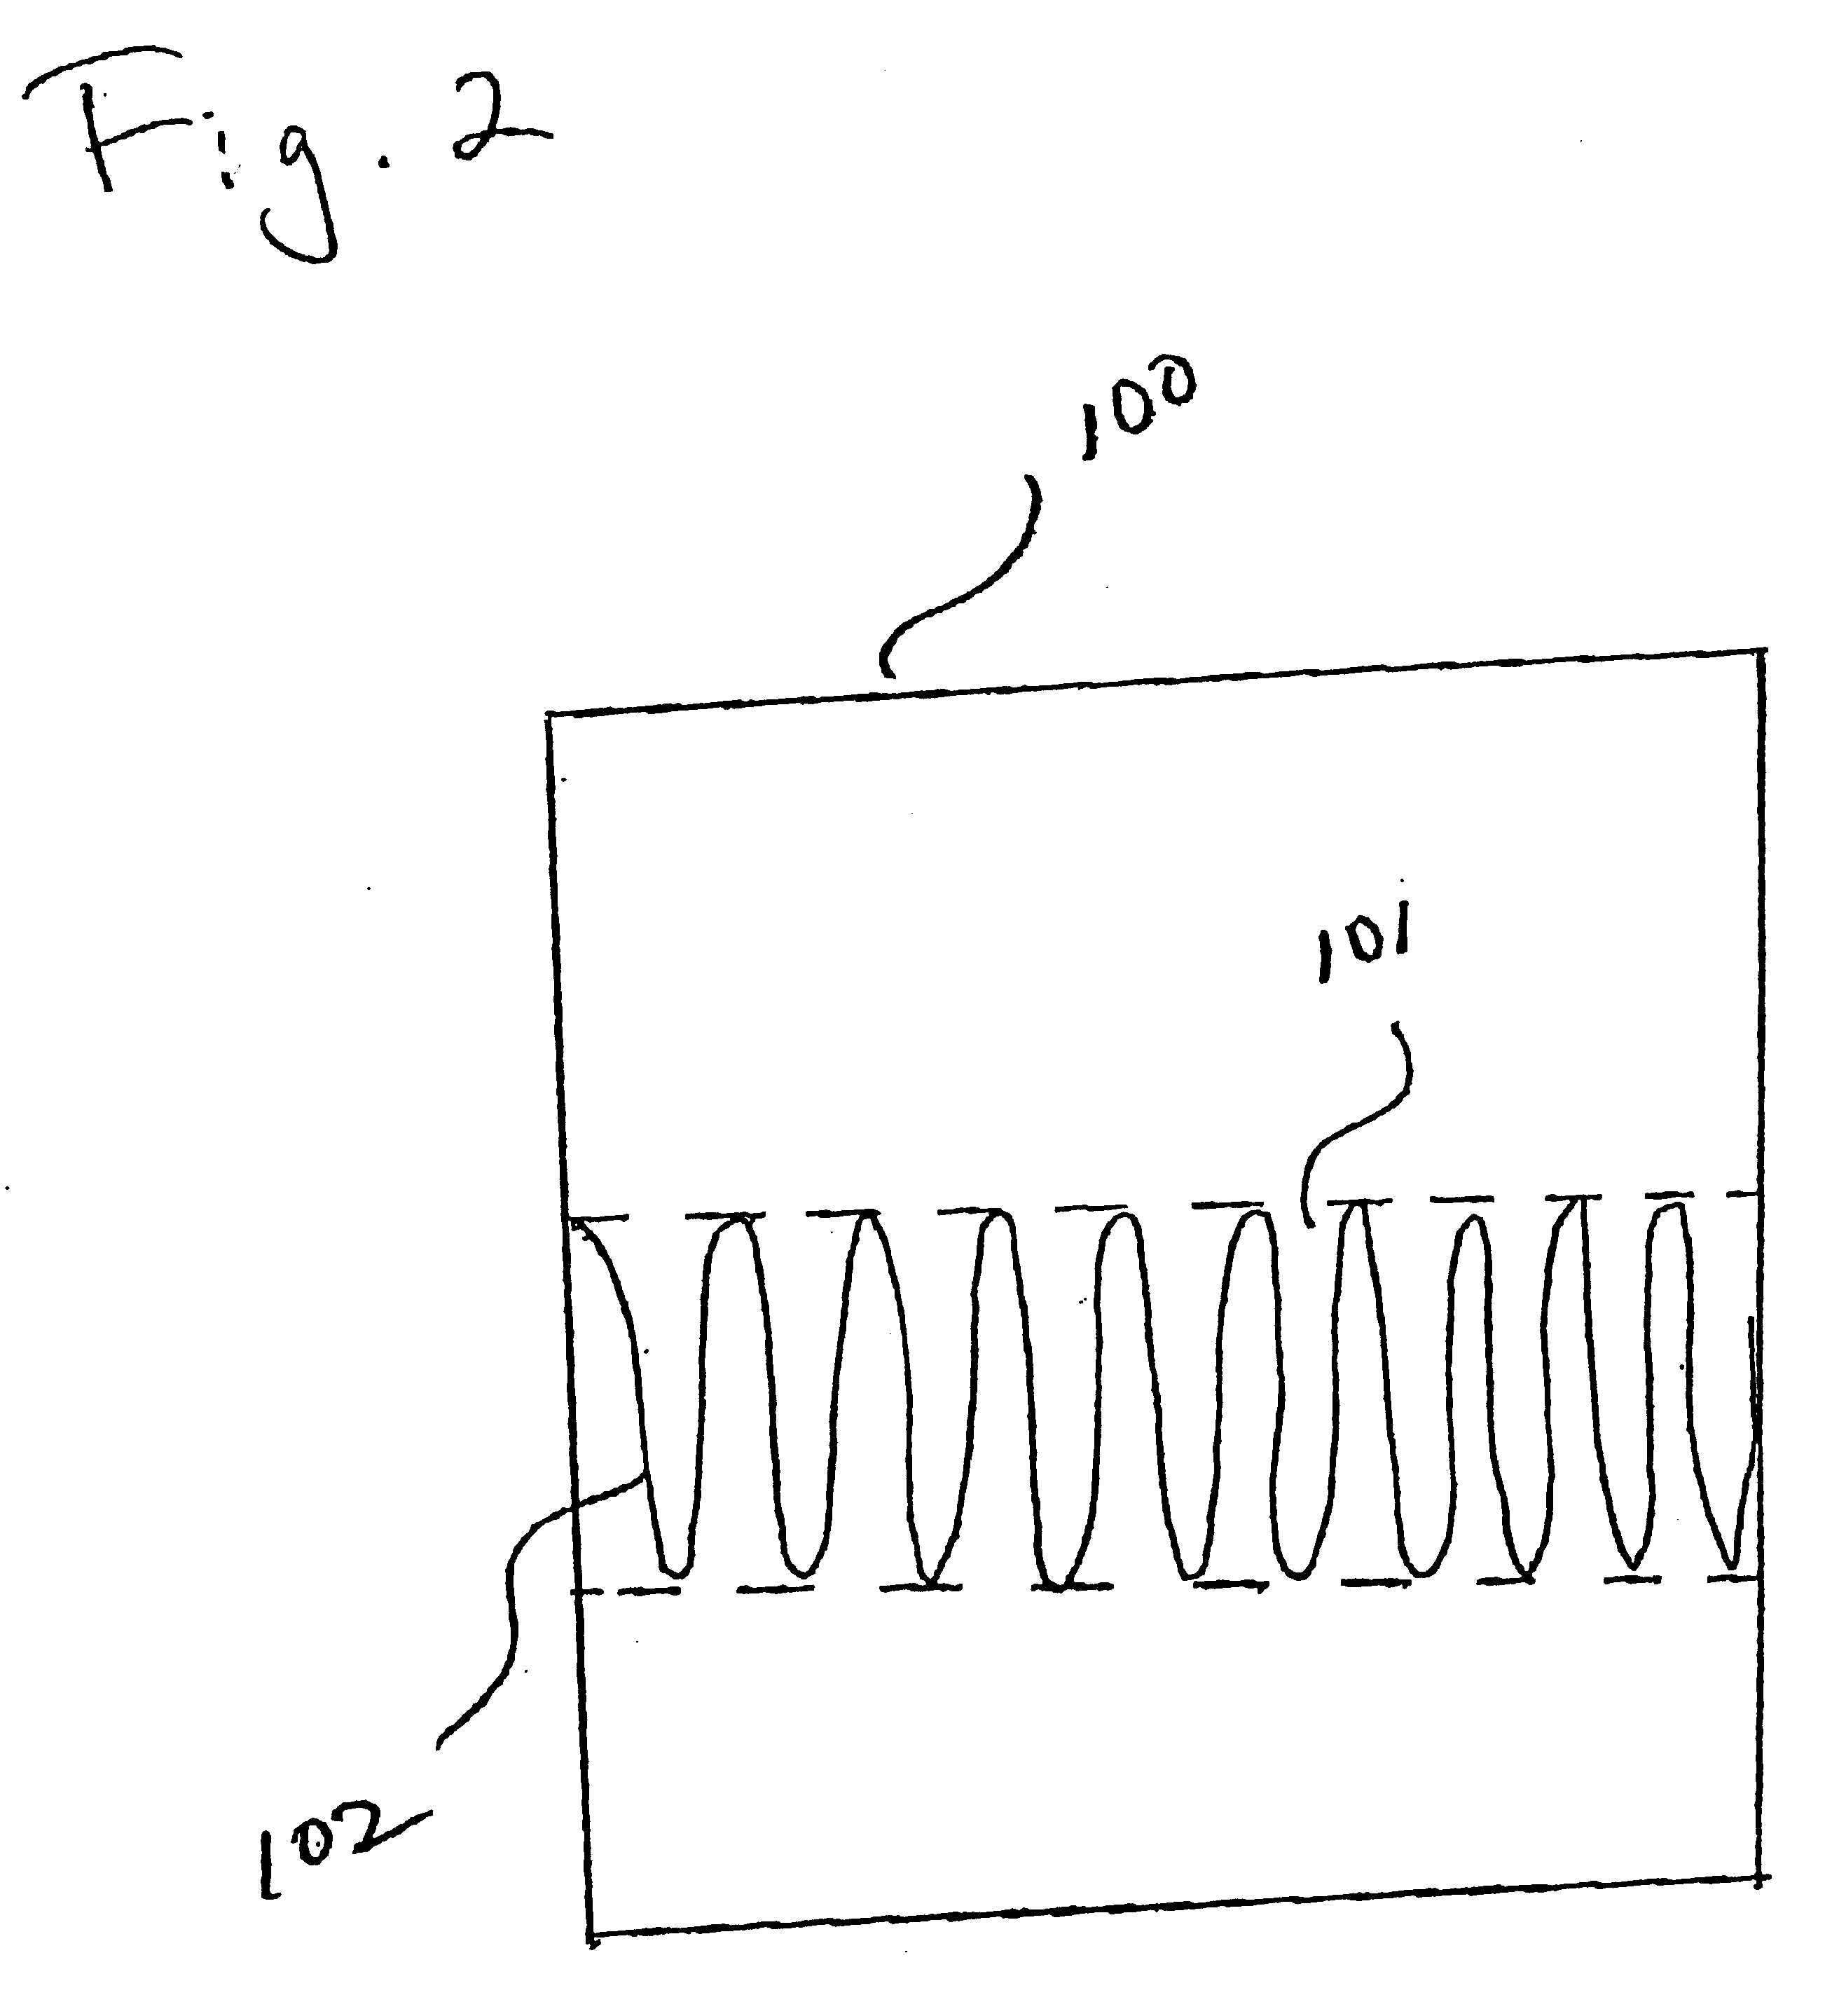 Inspectable buried test structures and methods for inspecting the same